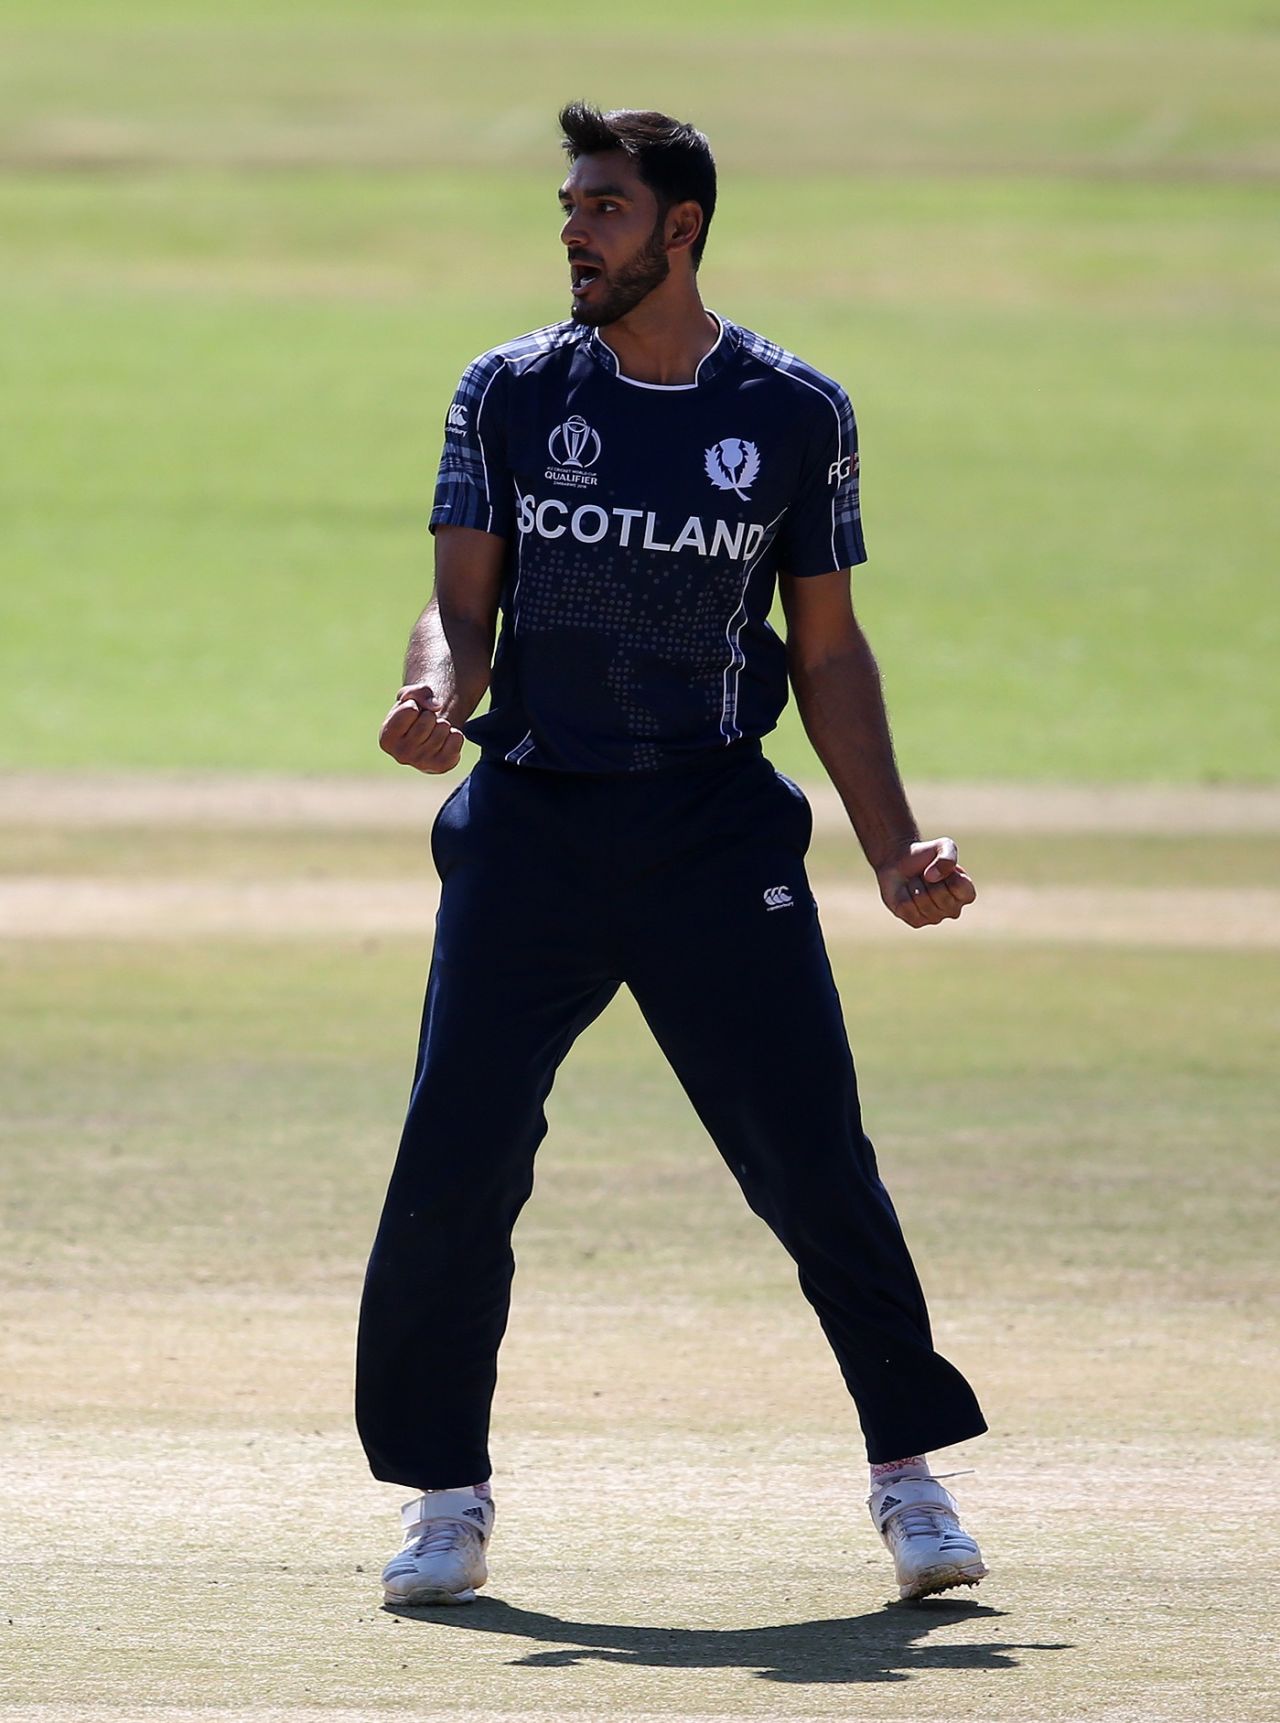 Safyaan Sharif celebrates the wicket of Shai Hope, West Indies v Scotland, World Cup Qualifiers, Harare, March 21, 2018